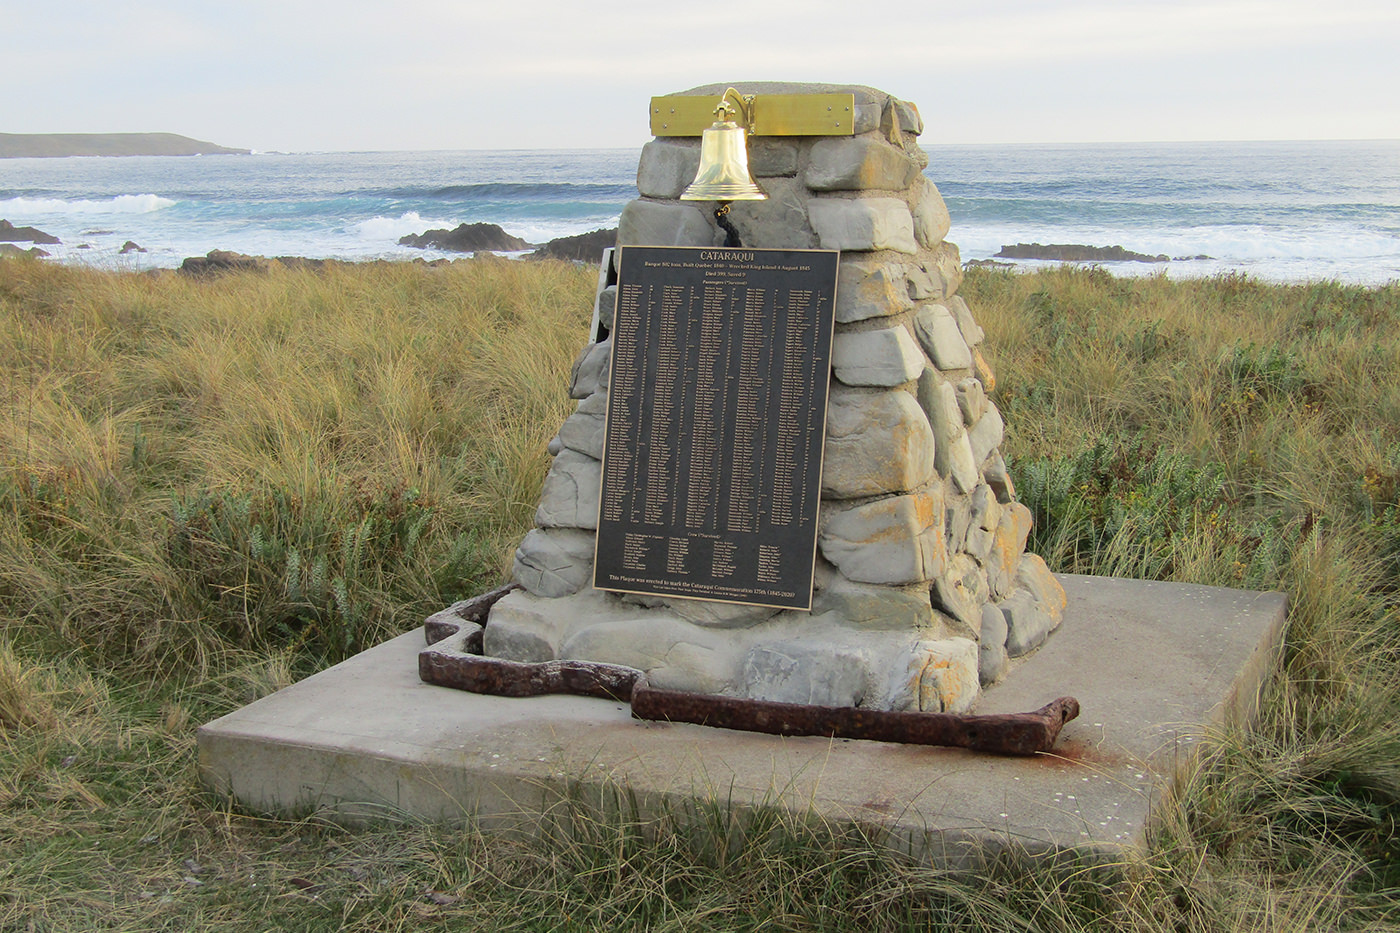 Stone monument with a brass bell and a plaque, surrounded by grass on a rocky shoreline.